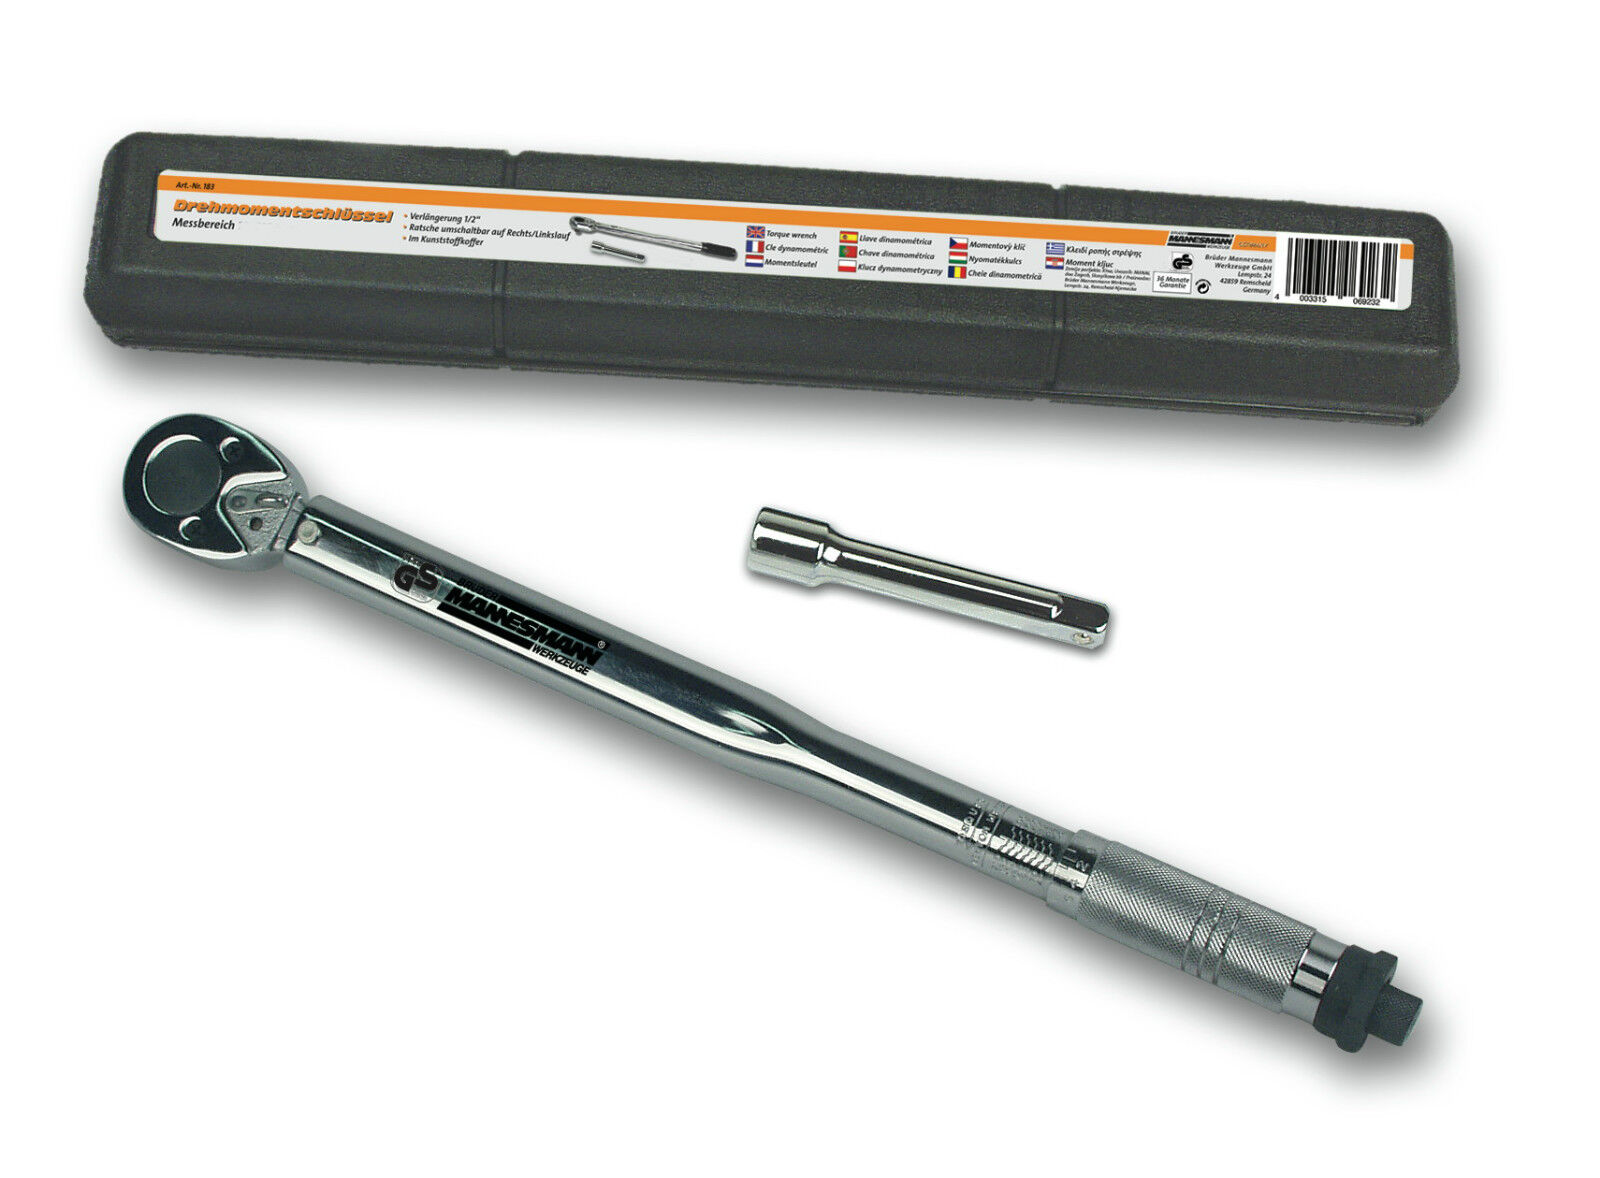 Mathis Toegeven supermarkt Mannesmann Automatic Torque Wrench / 1/2" / 12.5mm Drive / 40 - 210 NM GS  TUV 4003315069232 | eBay